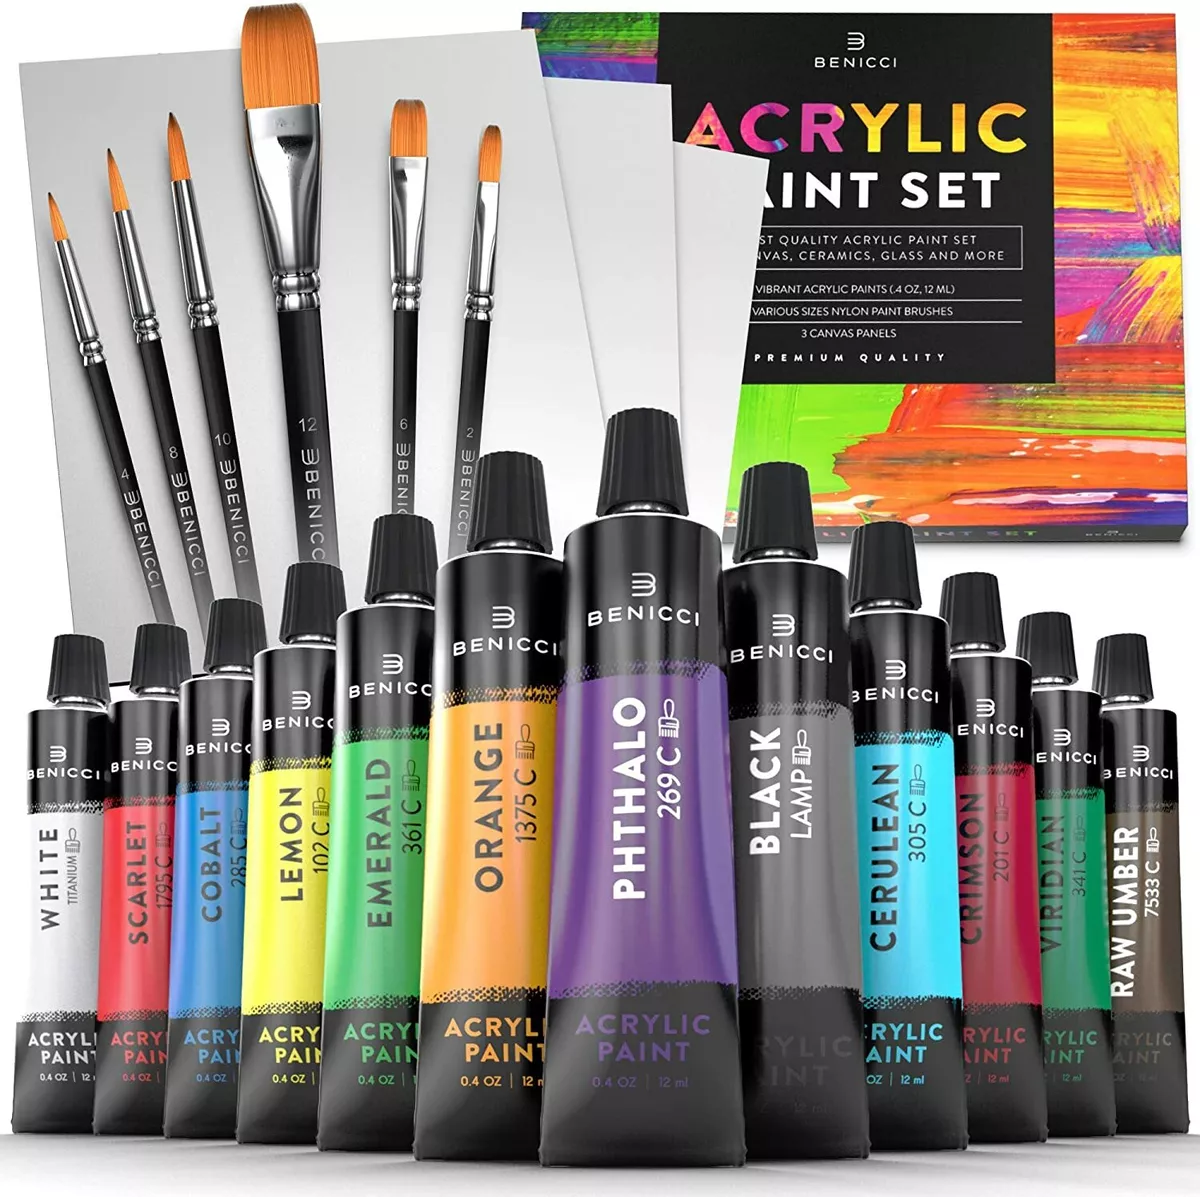 Acrylic Paint Set for Kids, Artists and Adults - 12 Vibrant Colors